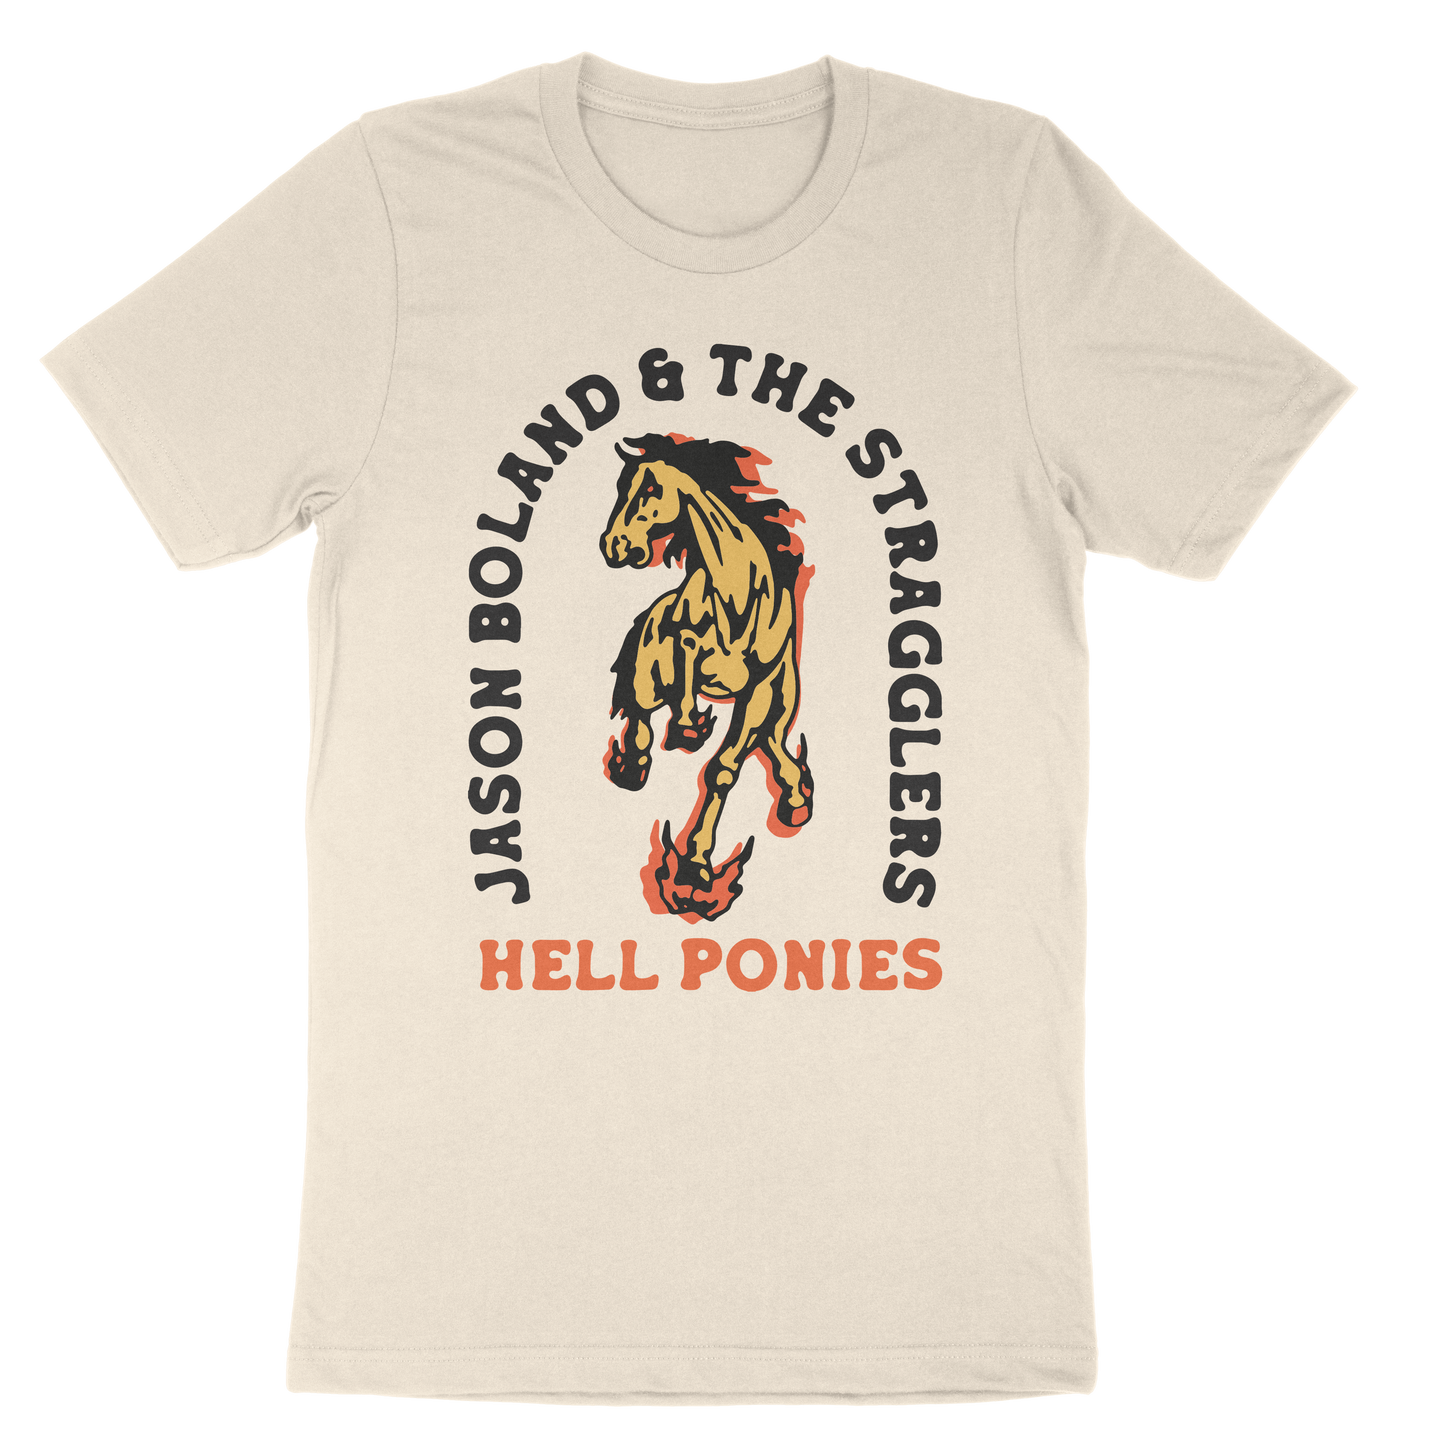 Hell Ponies Tee - Natural - Jason Boland & the Stragglers